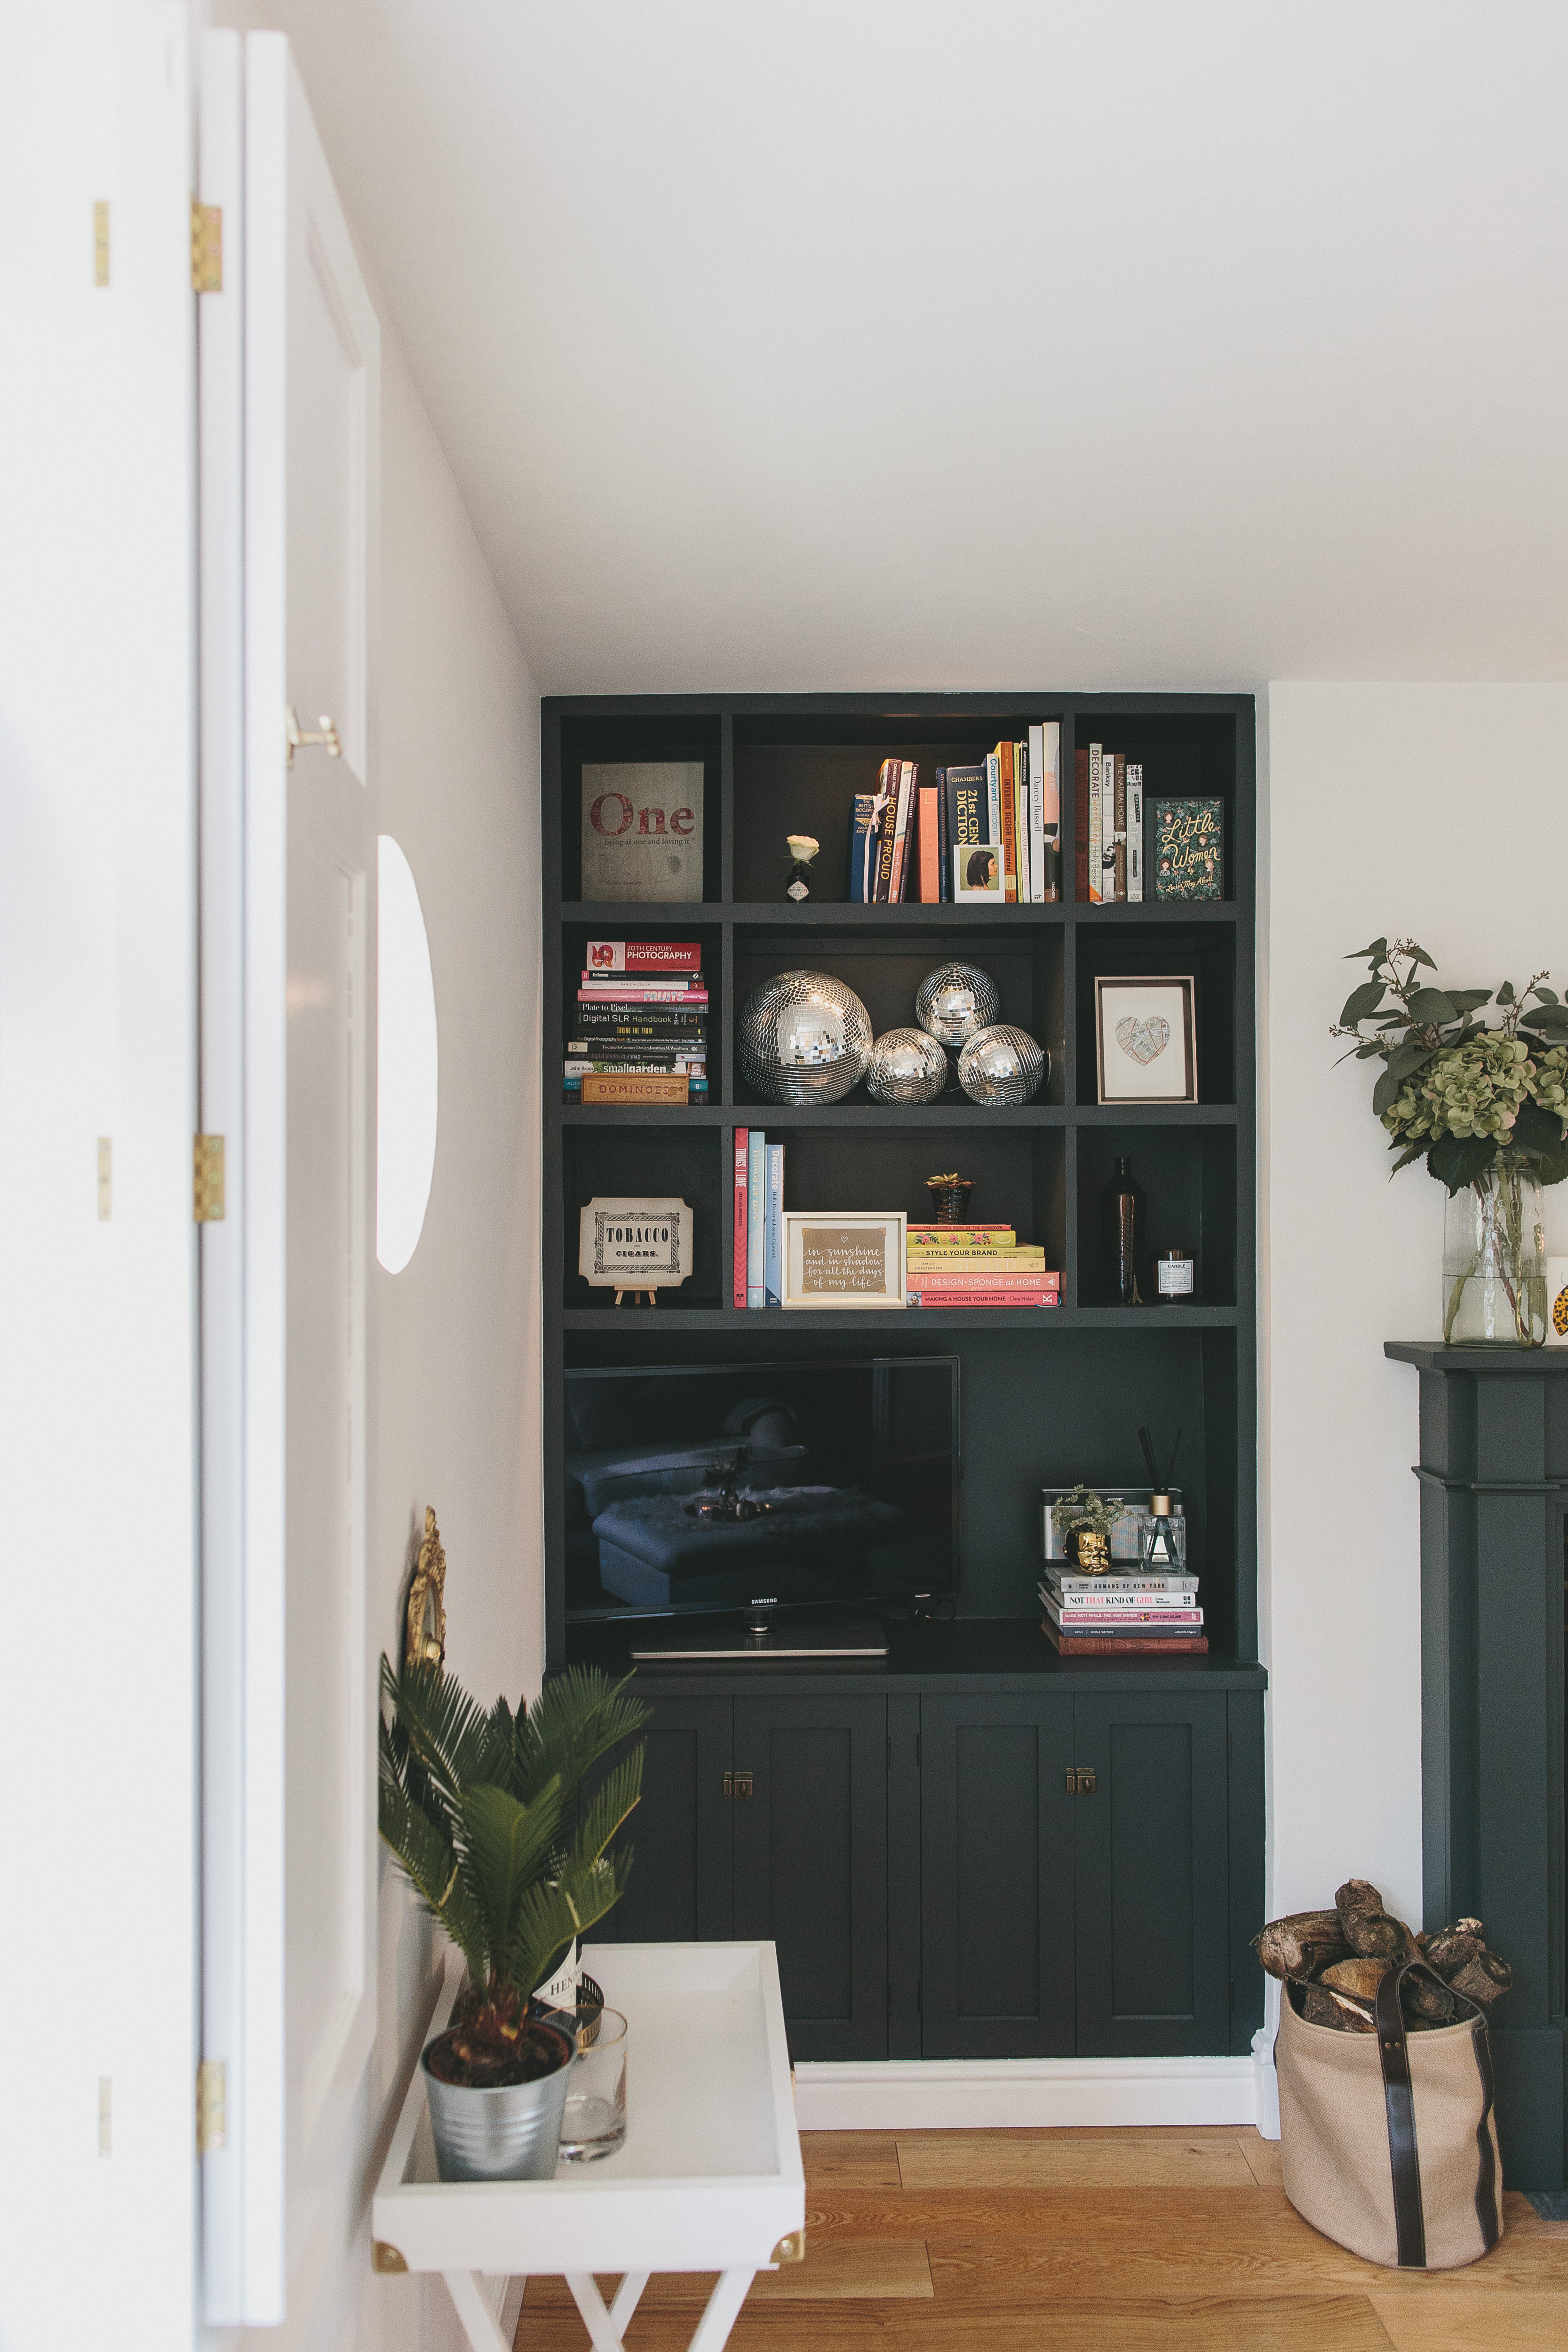 How I Saved 700 On My Alcove Shelving, Built In Bookcase Over Radiator